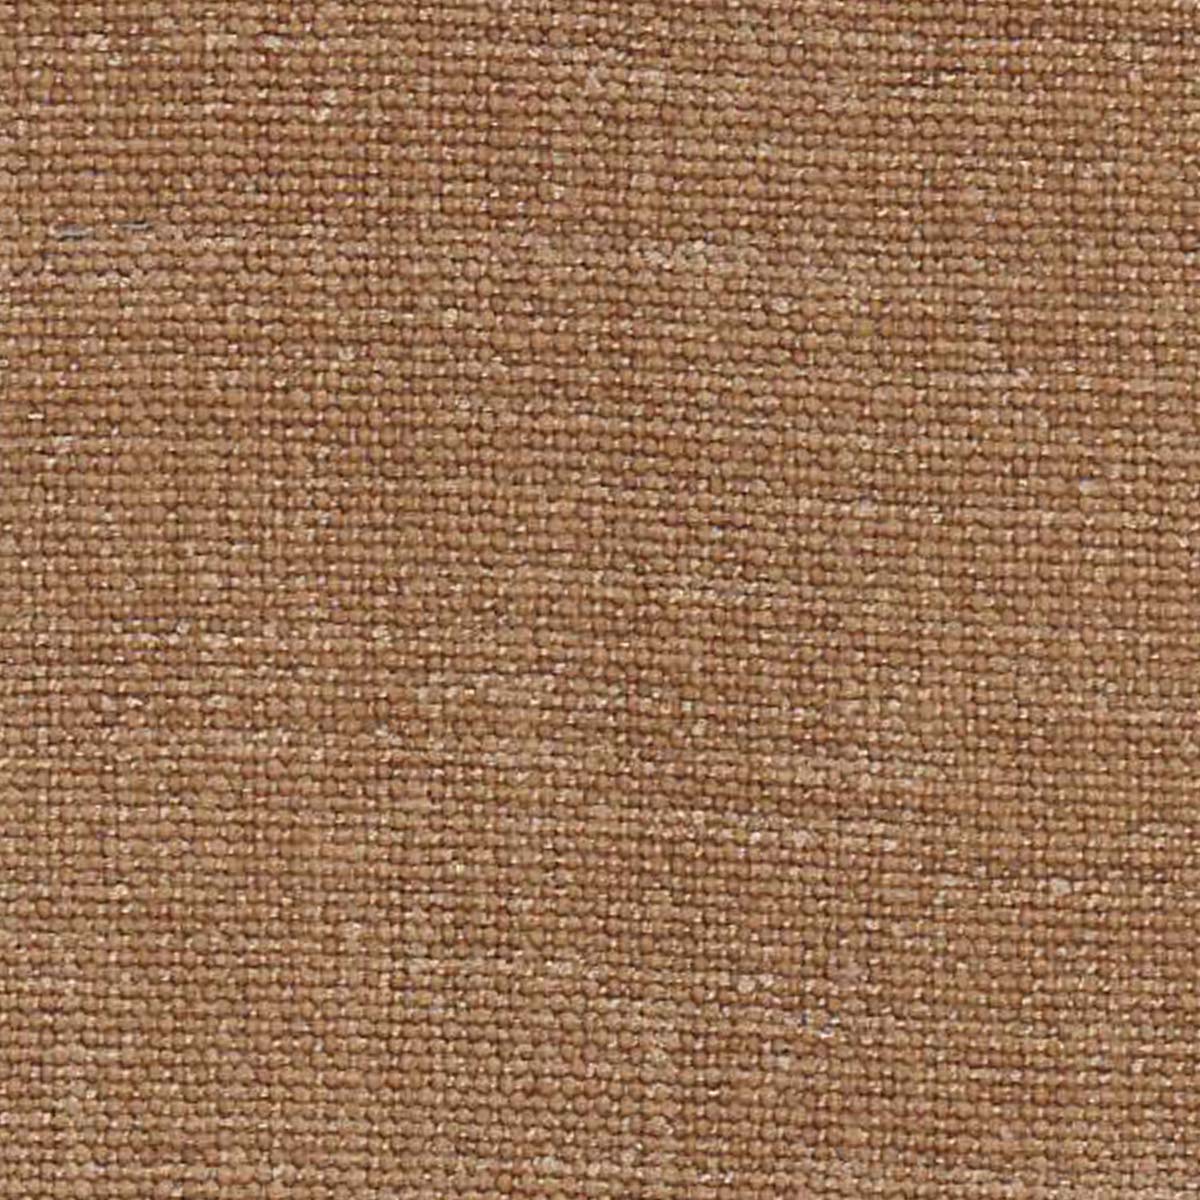 WANBY/GOLD - Upholstery Only Fabric Suitable For Drapery